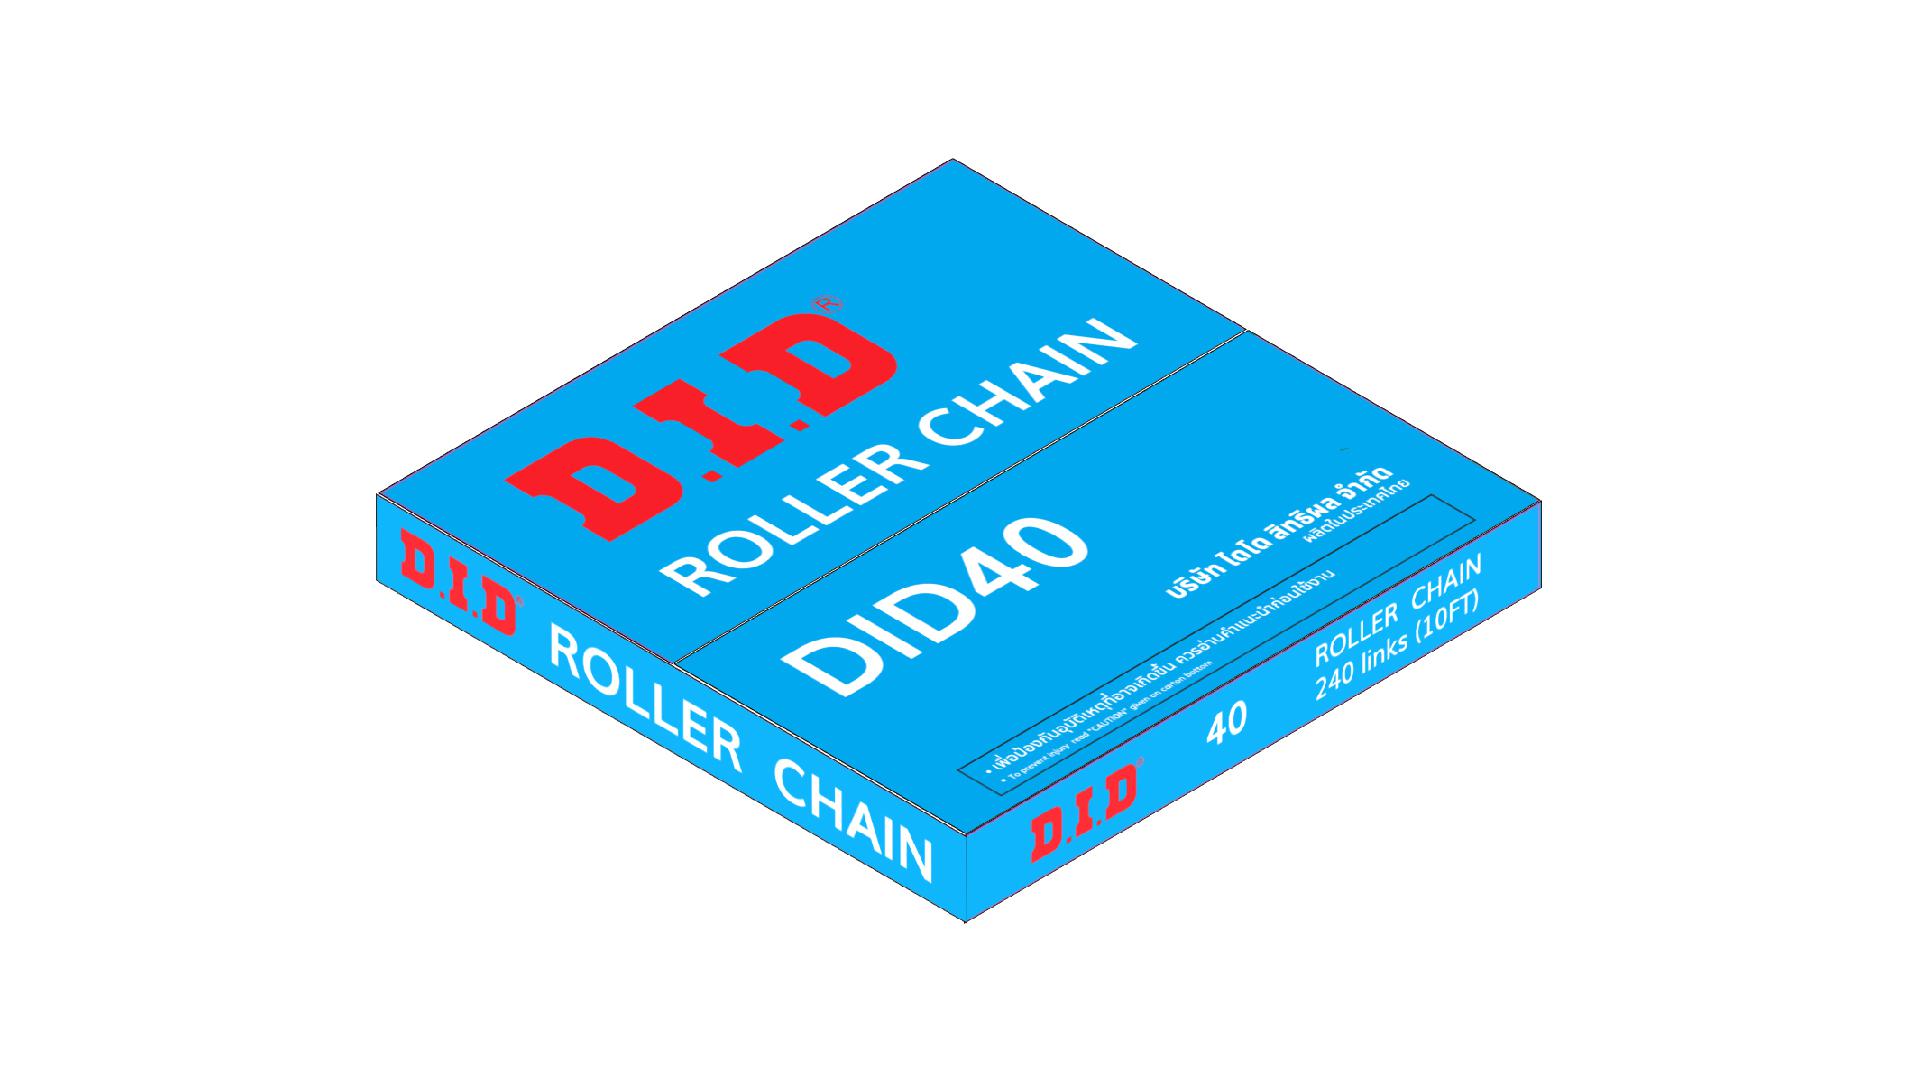 Roller chains for Power Transmission